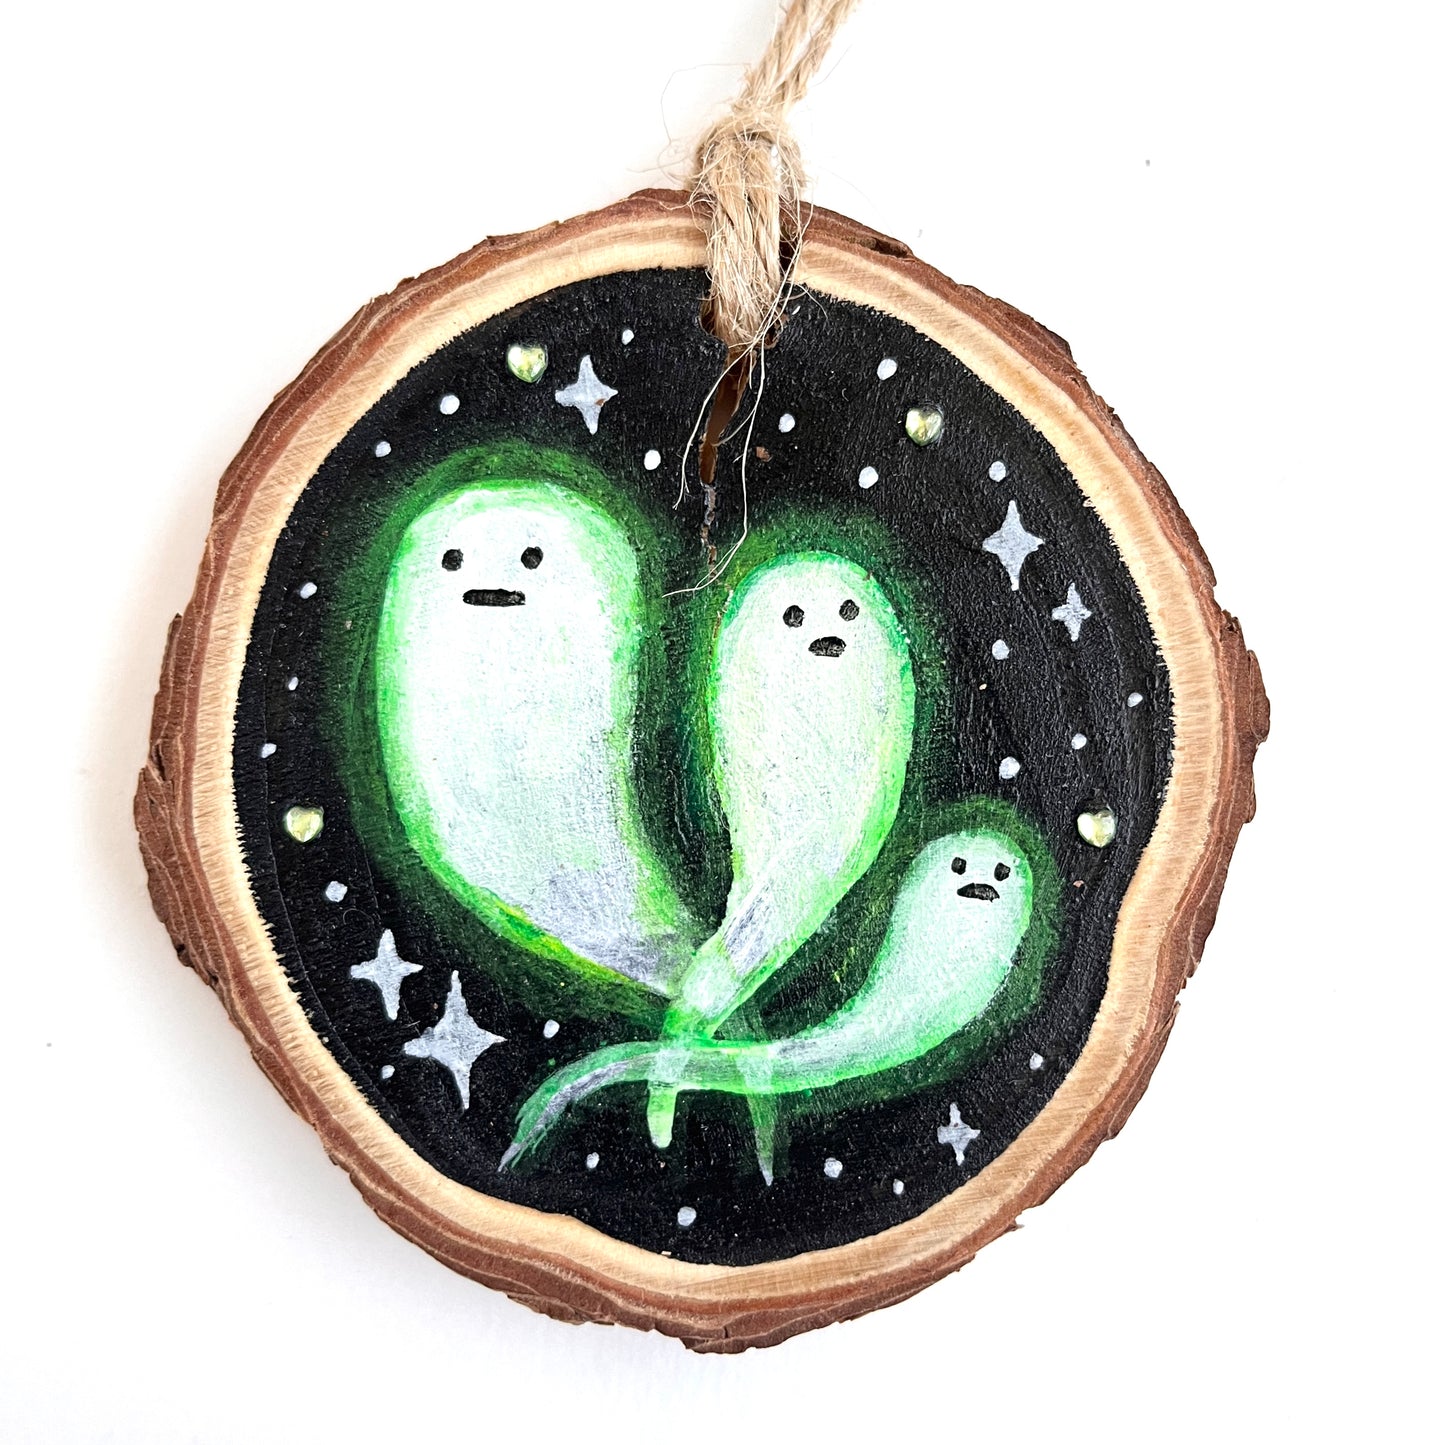 Three ghost that appear to be glowing decorate this wooden ornament with green heart rhinestones on a black background.